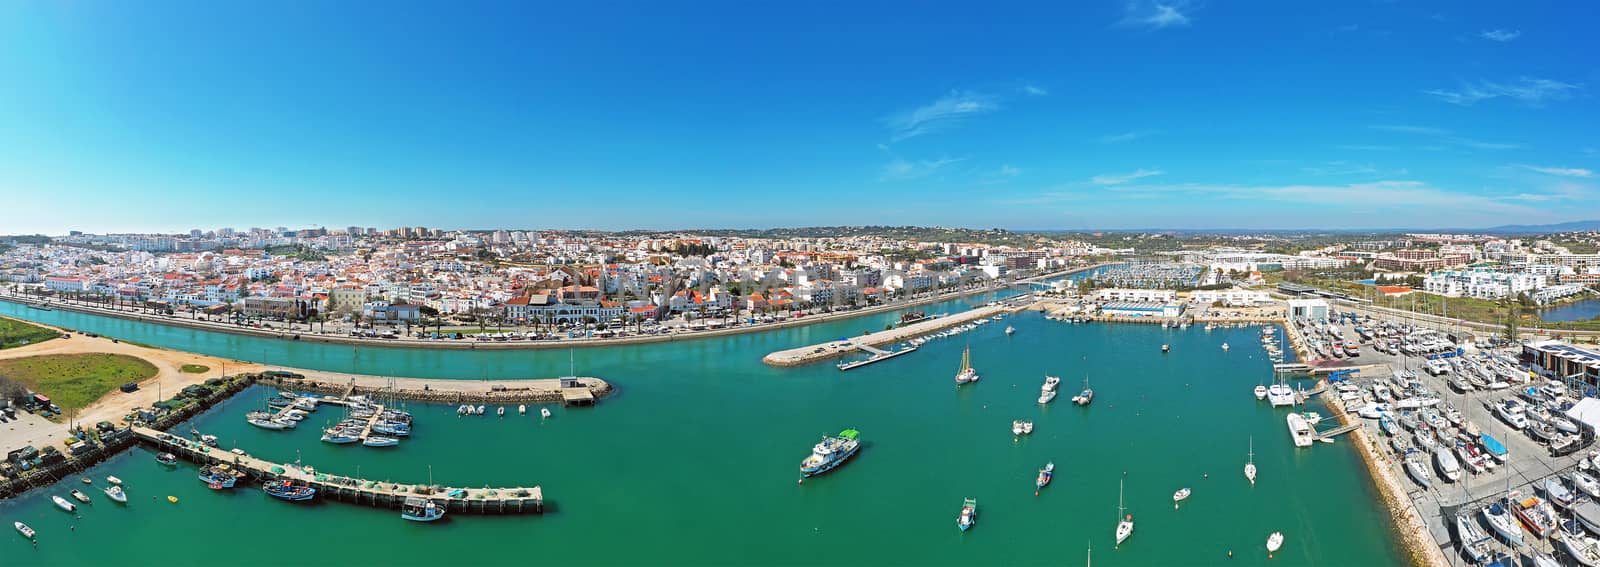 Aerial panorama from the harbor and city Lagos in the Algarve Po by devy